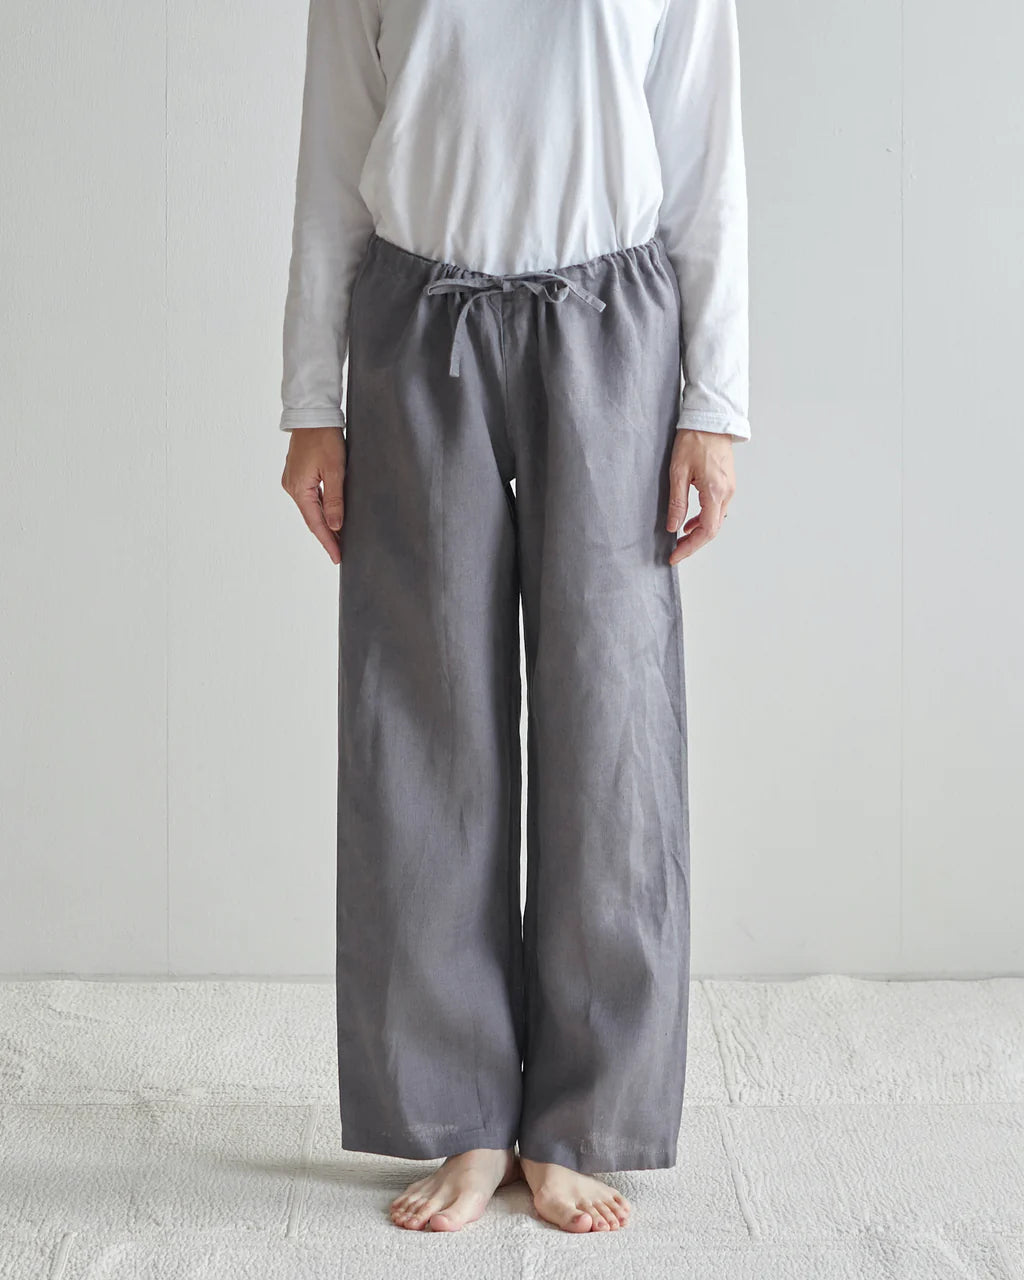 the lounge pant in faded black | Lounge pants, Garment, Work wear